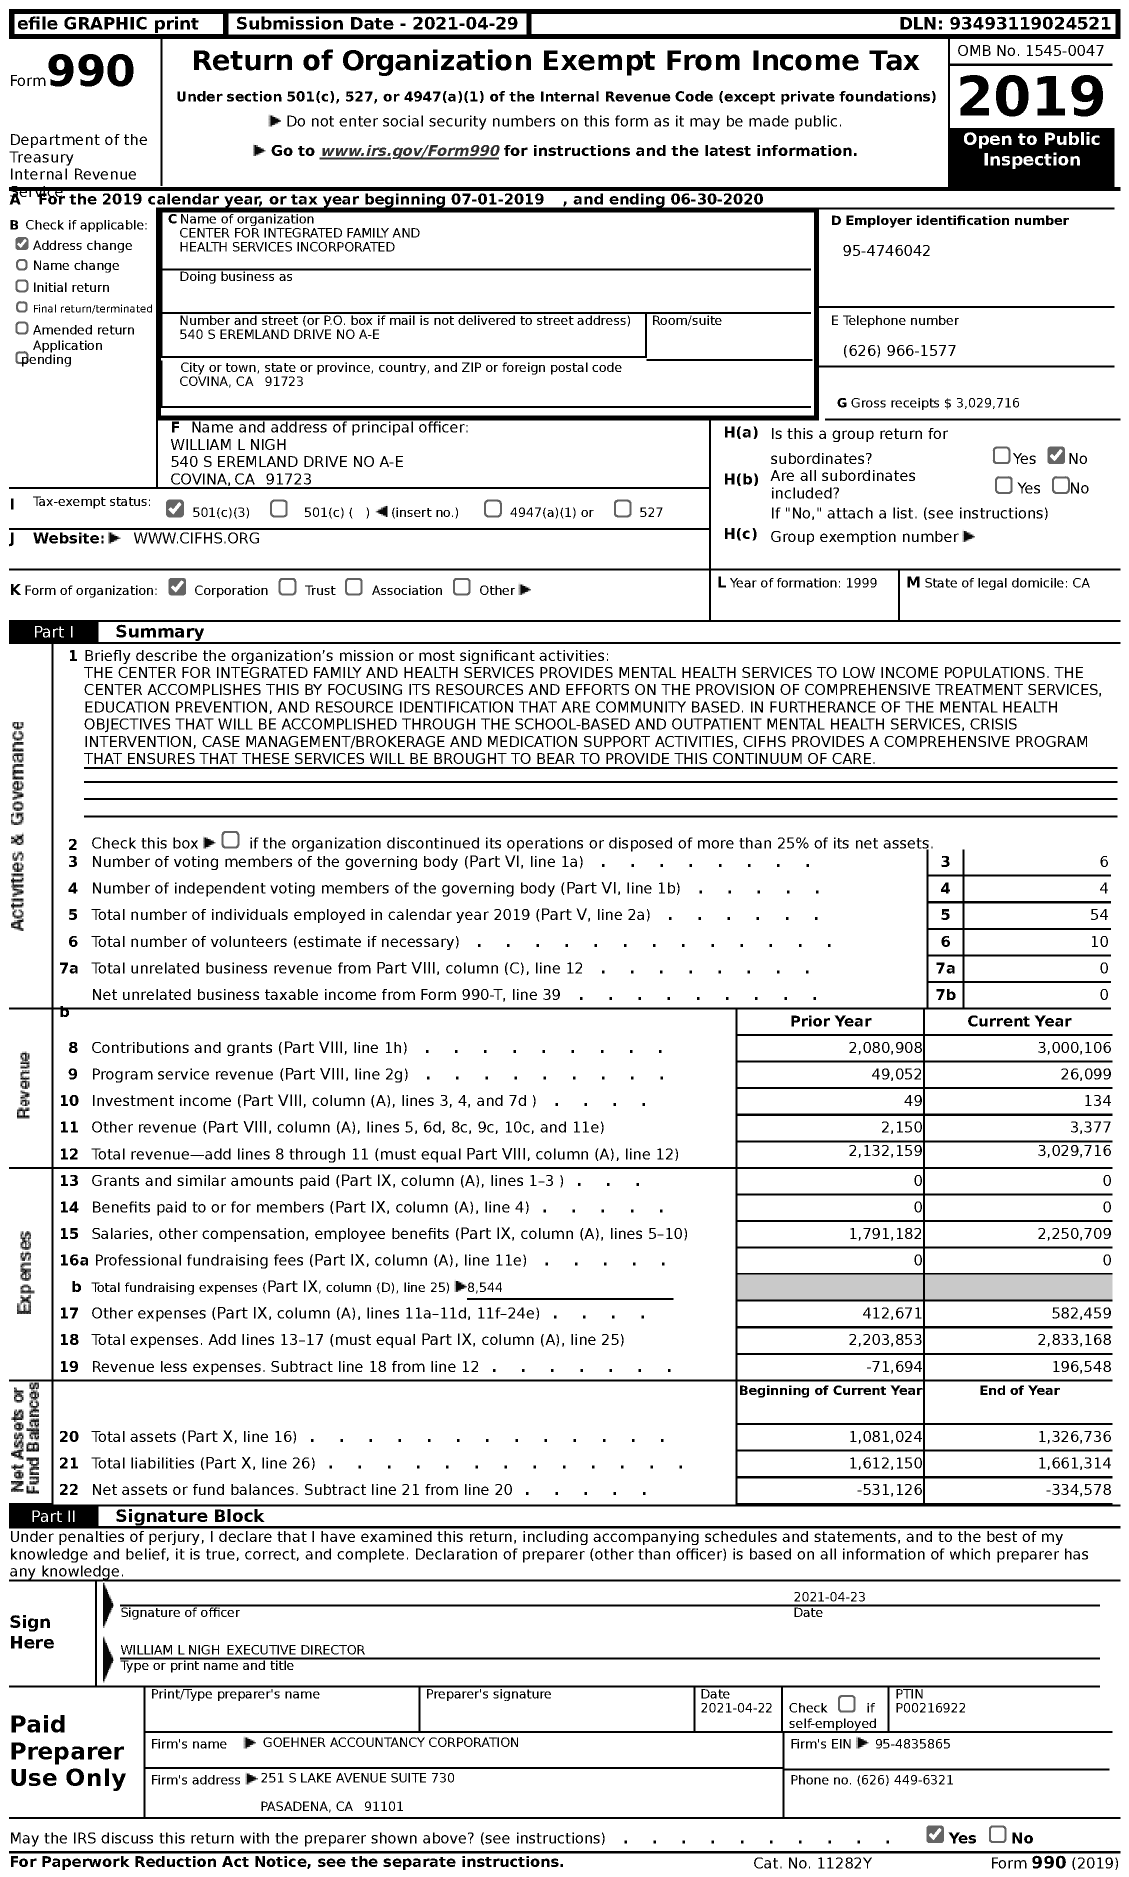 Image of first page of 2019 Form 990 for Center for Integrated Family and Health Services (CIFHS)